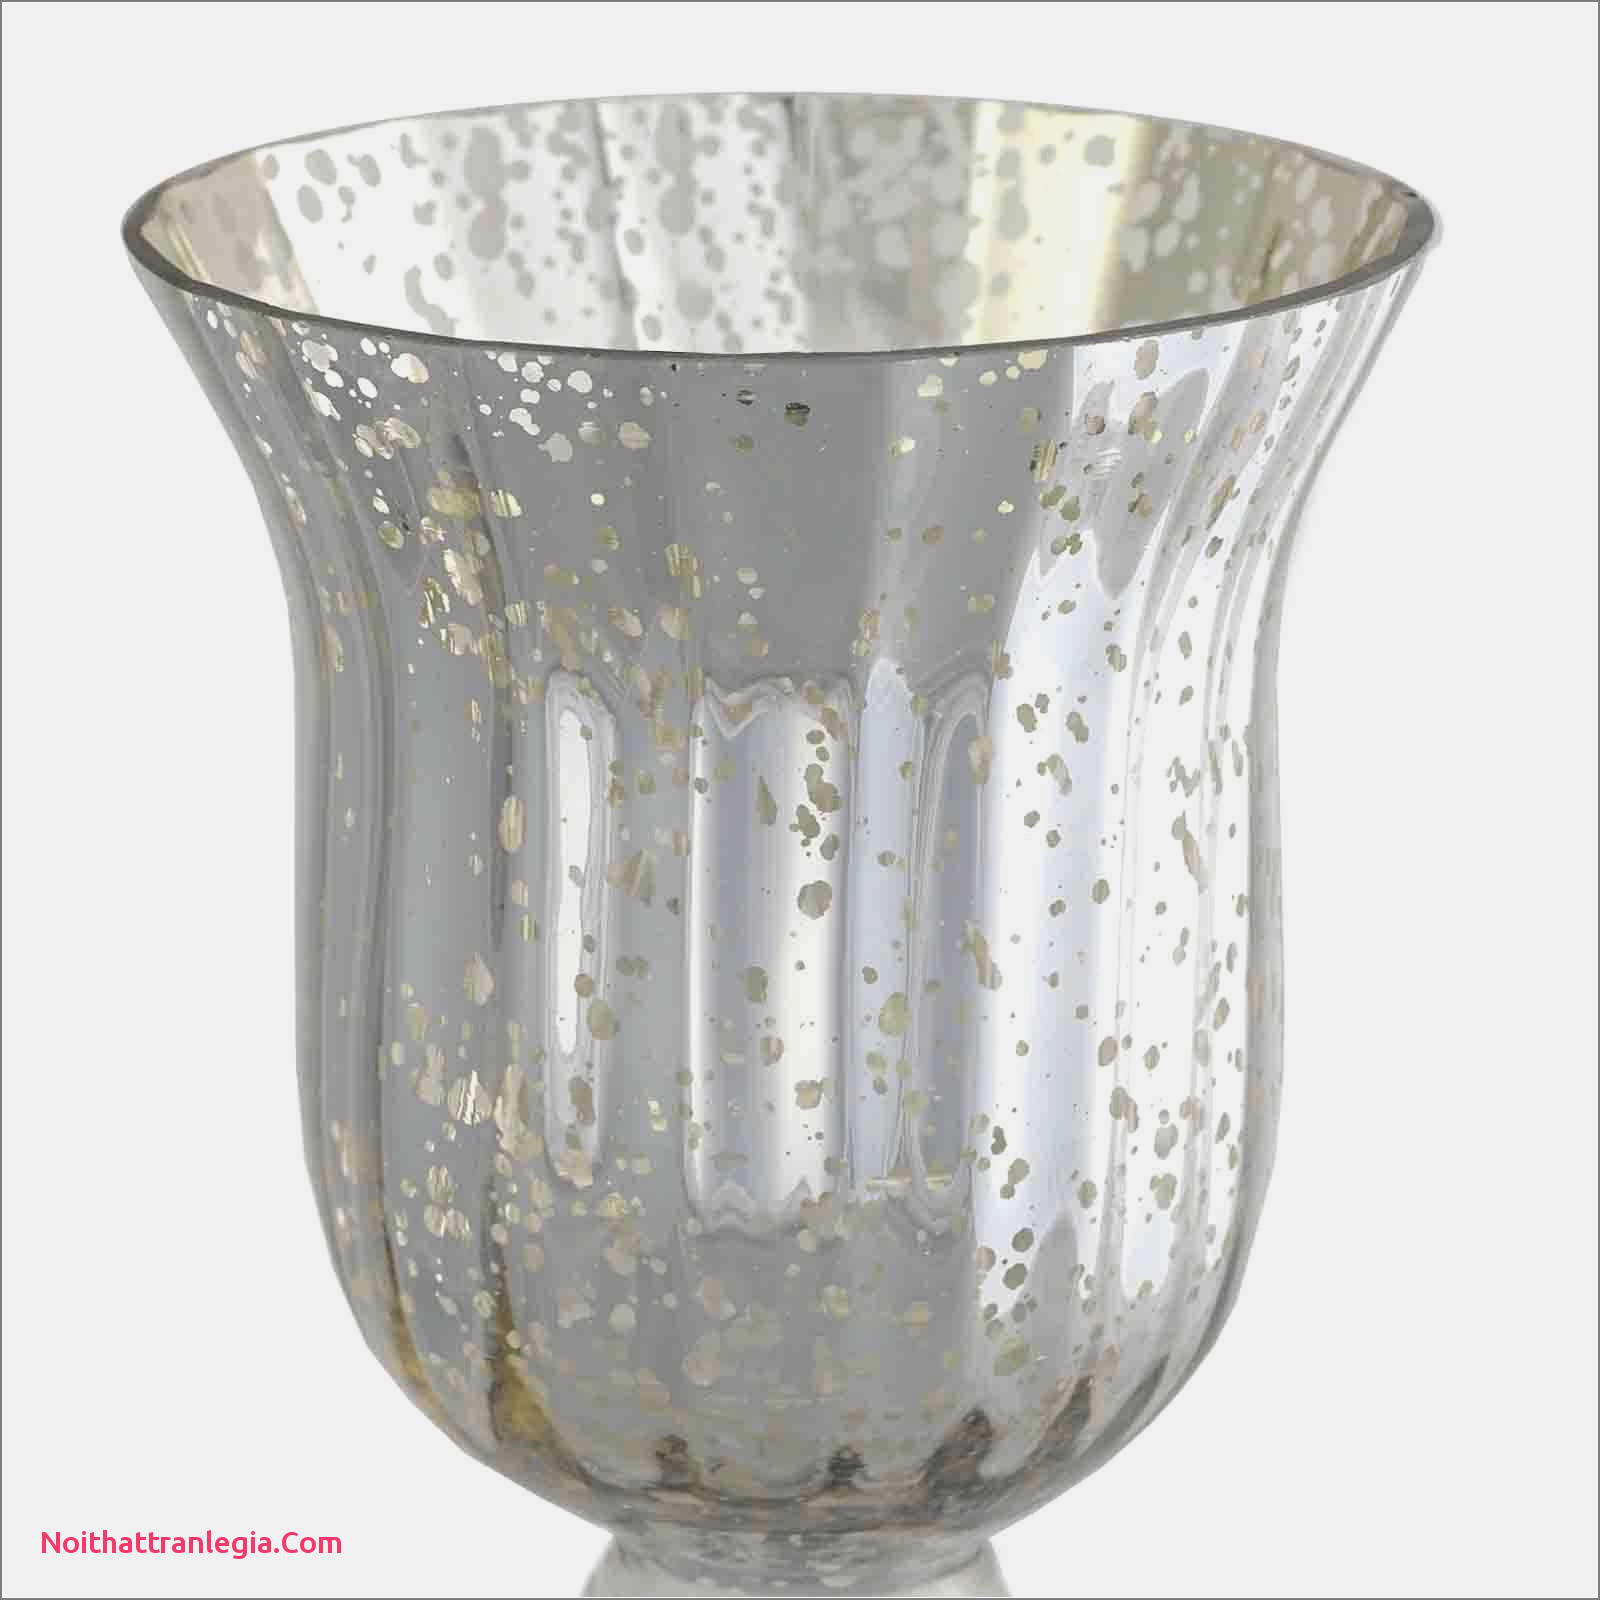 11 Unique Small White Vases Bulk 2024 free download small white vases bulk of 20 wedding vases noithattranlegia vases design pertaining to wedding guest gift ideas inspirational candles for wedding favors superb pe s5h vases candle vase i